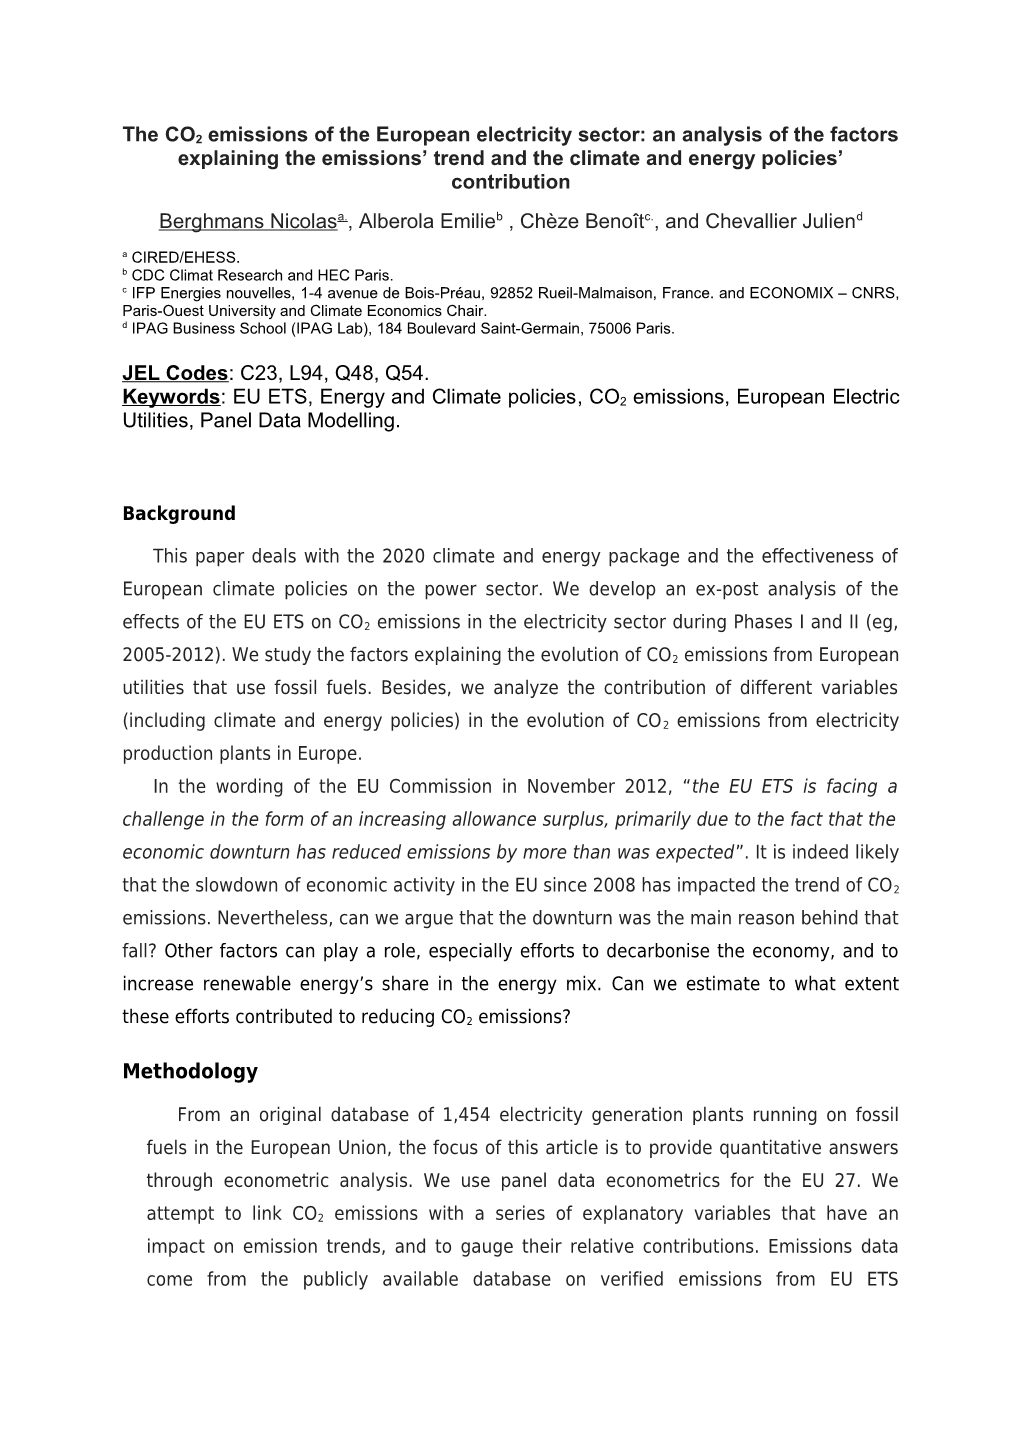 The CO2 Emissions of the European Electricity Sector: an Analysis of the Factors Explaining